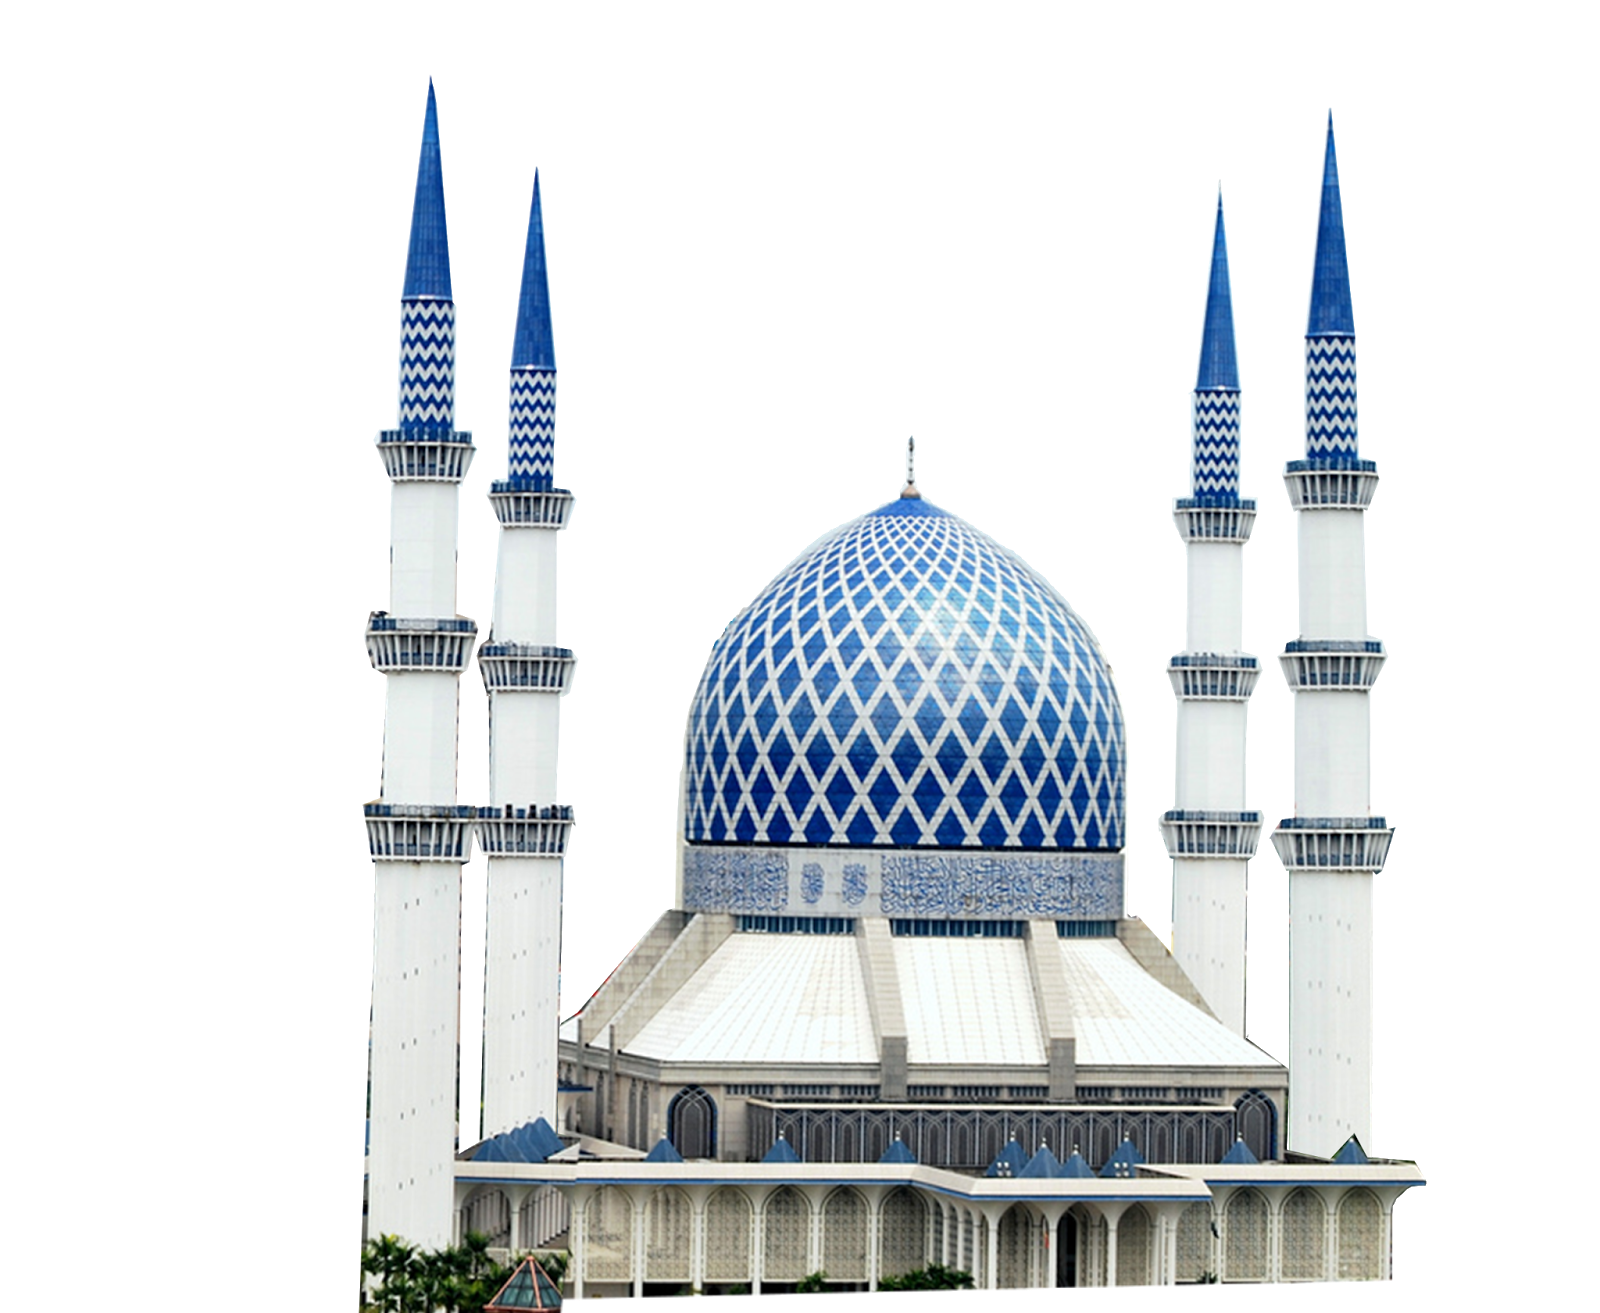 Mosque PNG image free Download 